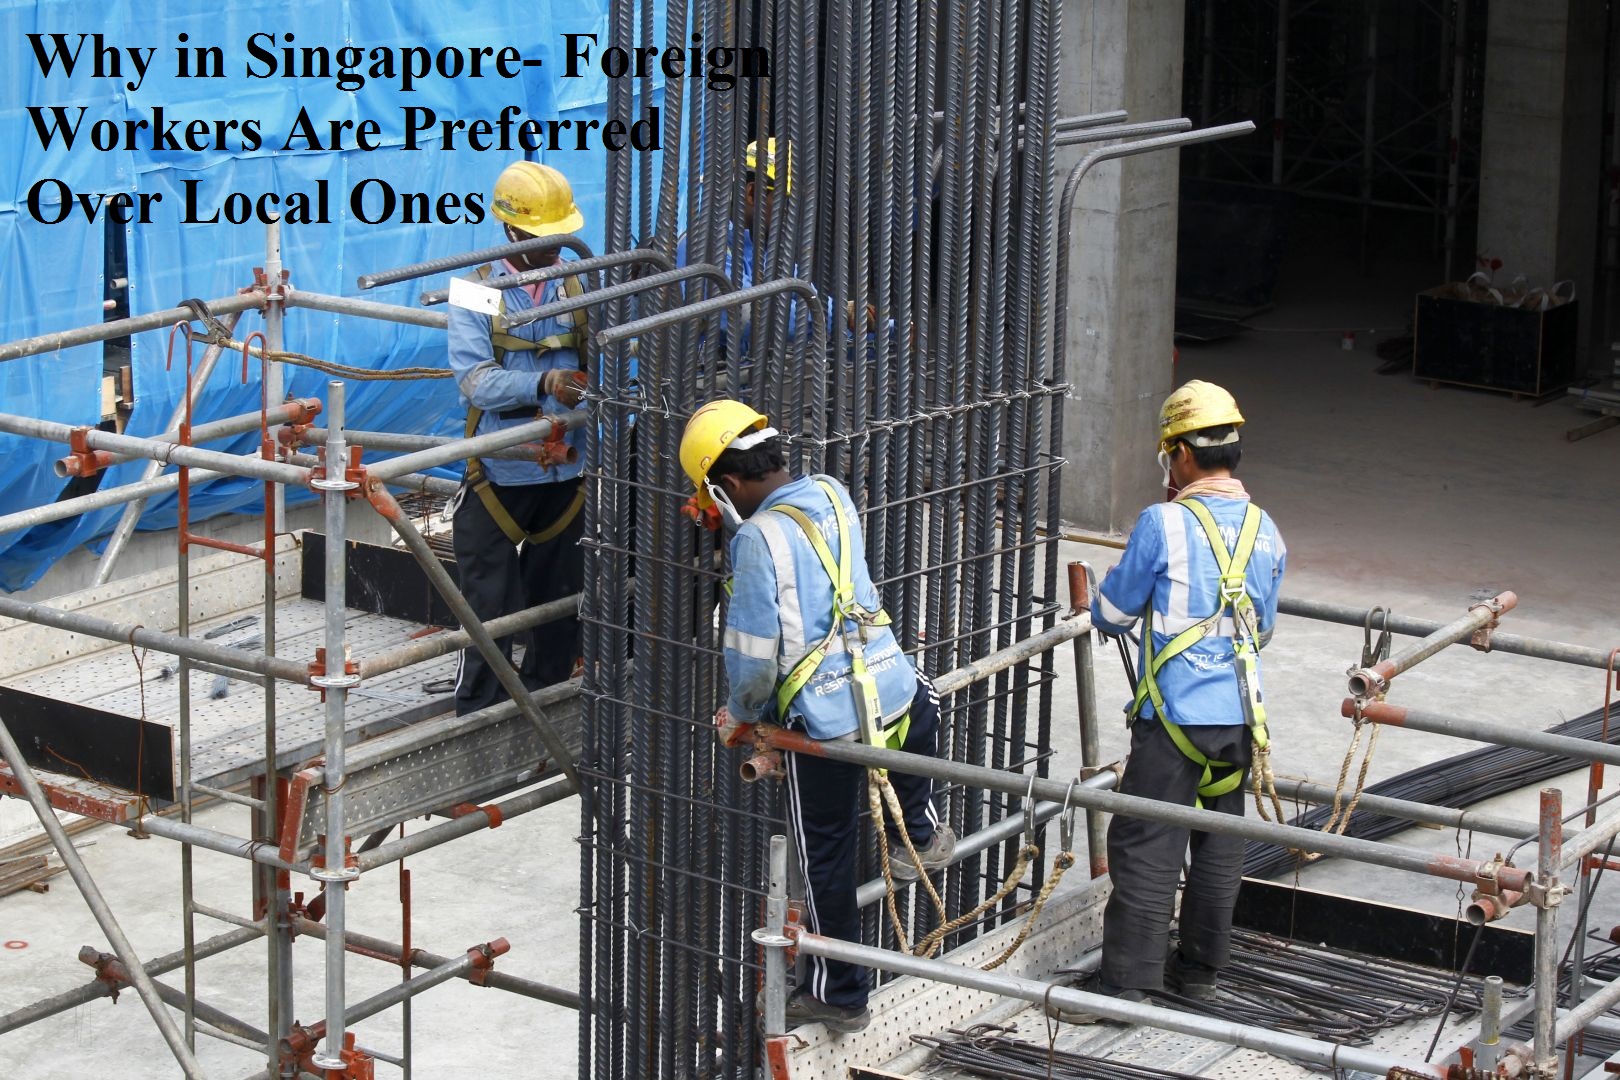 Why in Singapore- Foreign Workers Are Preferred Over Local Ones